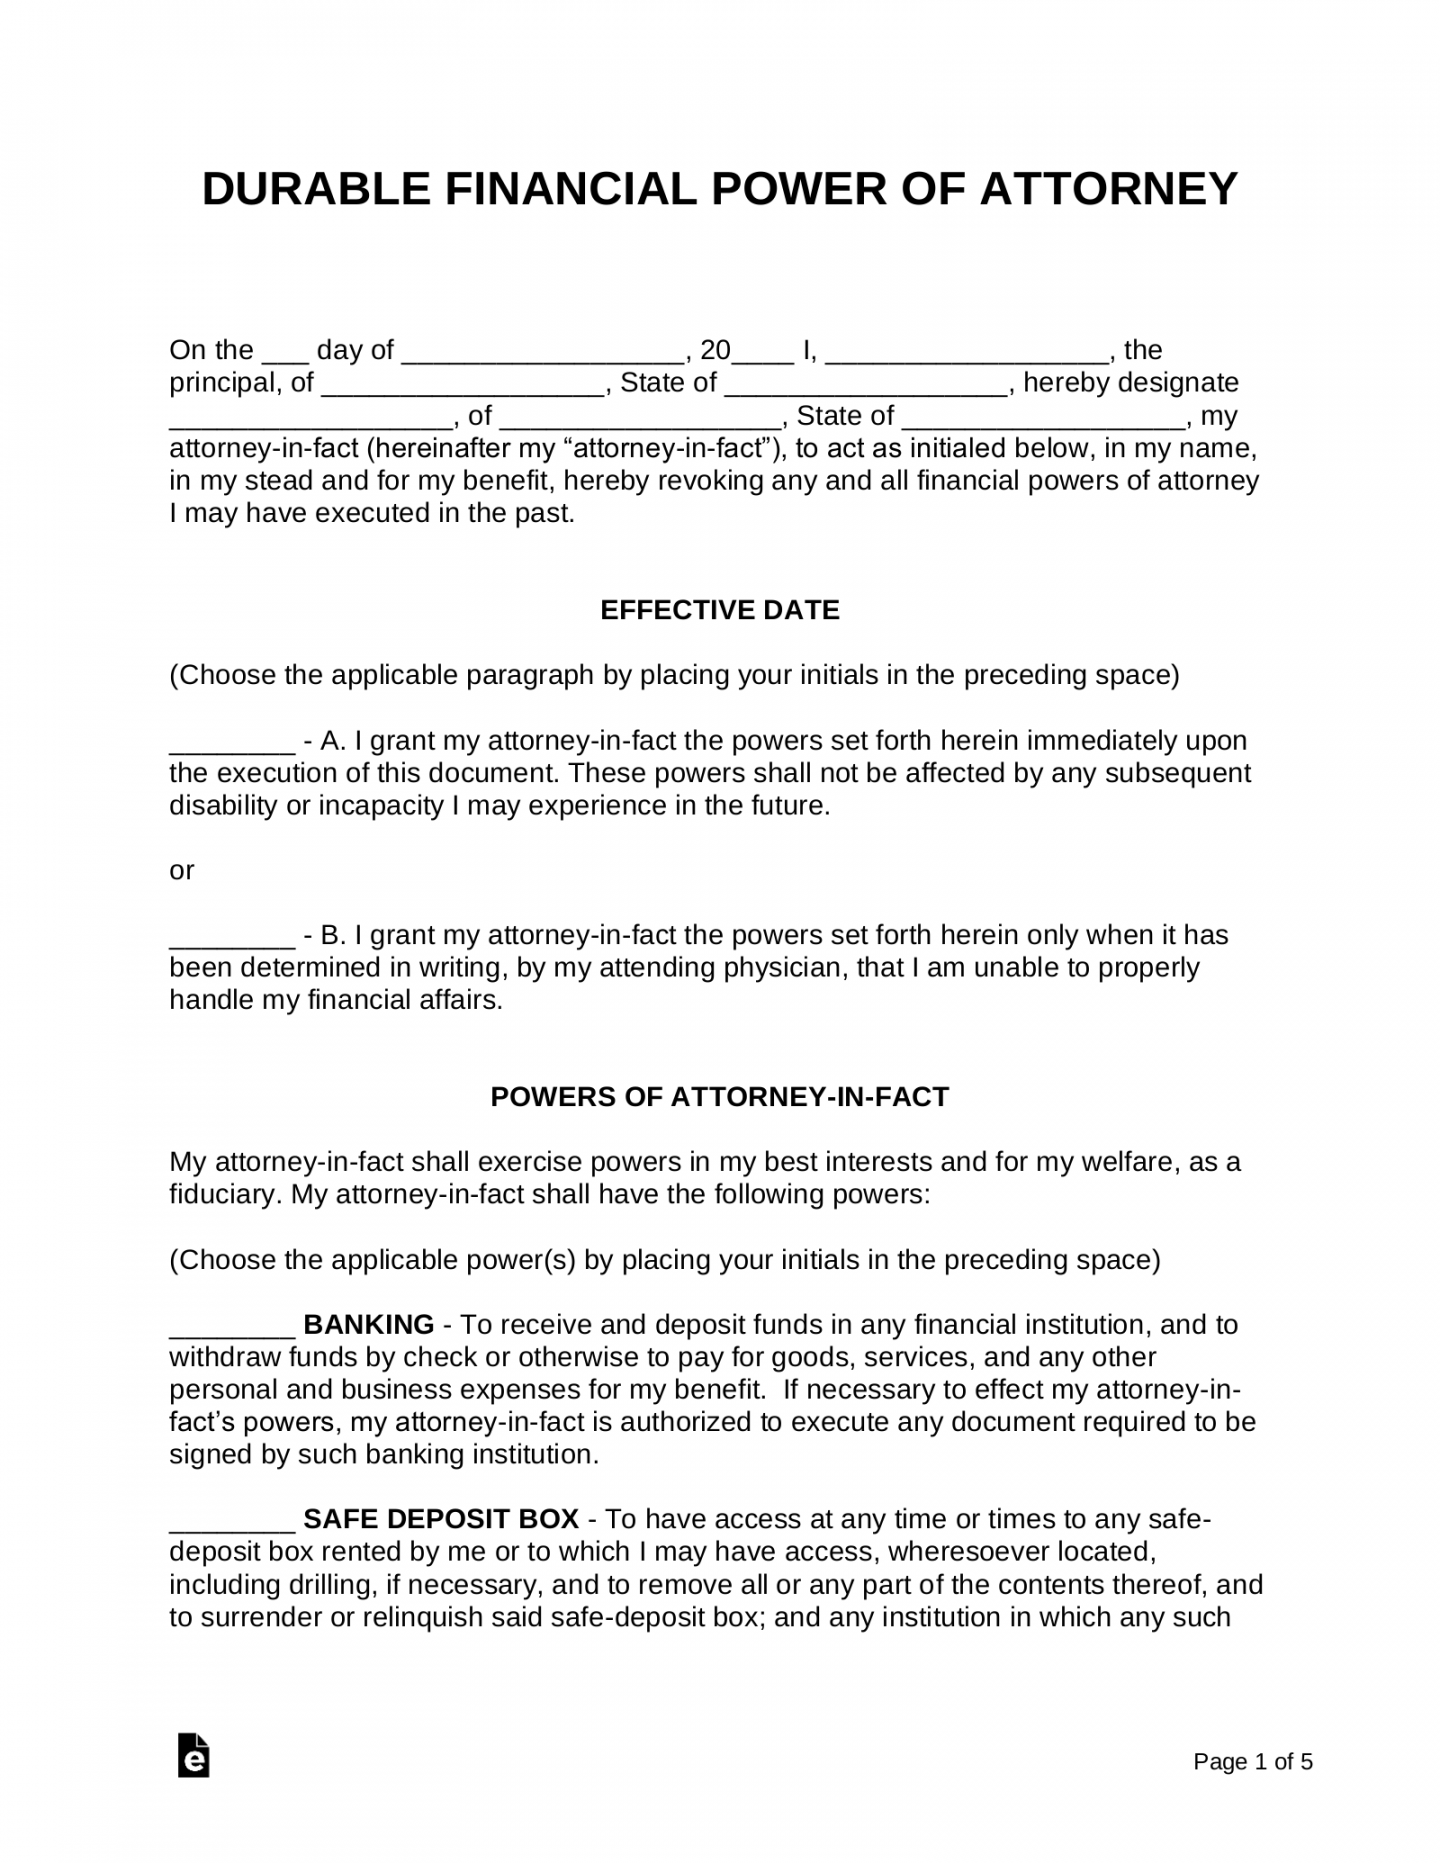 Free Power of Attorney (POA) Forms () - PDF  Word – eForms